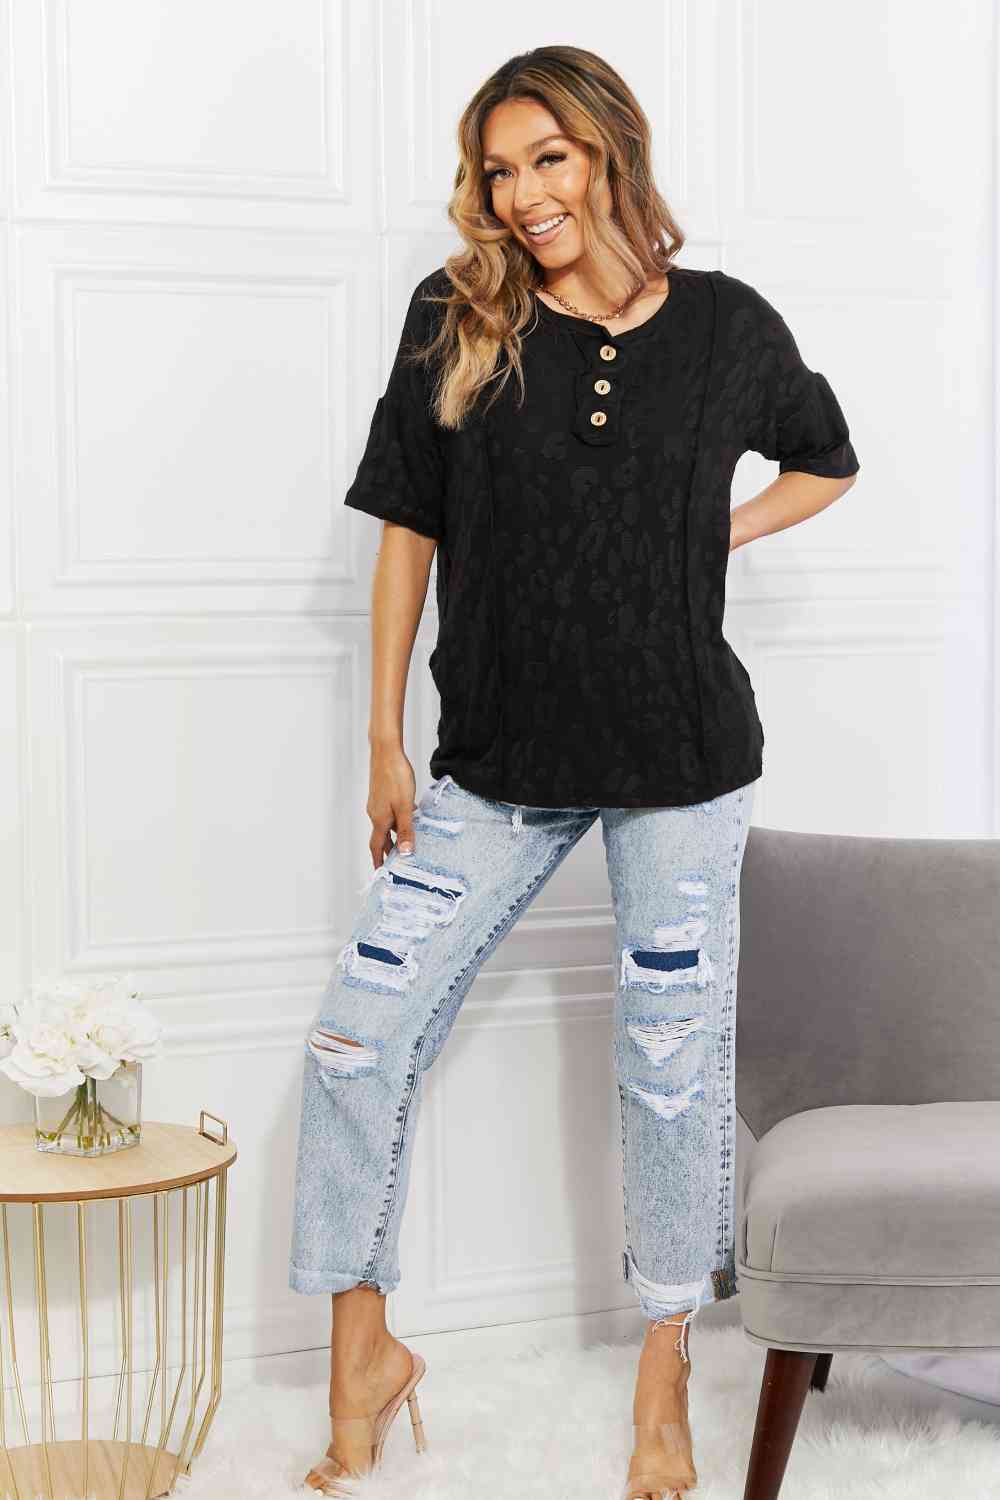 At The Fair Animal Textured Top in Black - Camis & Tops - Shirts & Tops - 5 - 2024